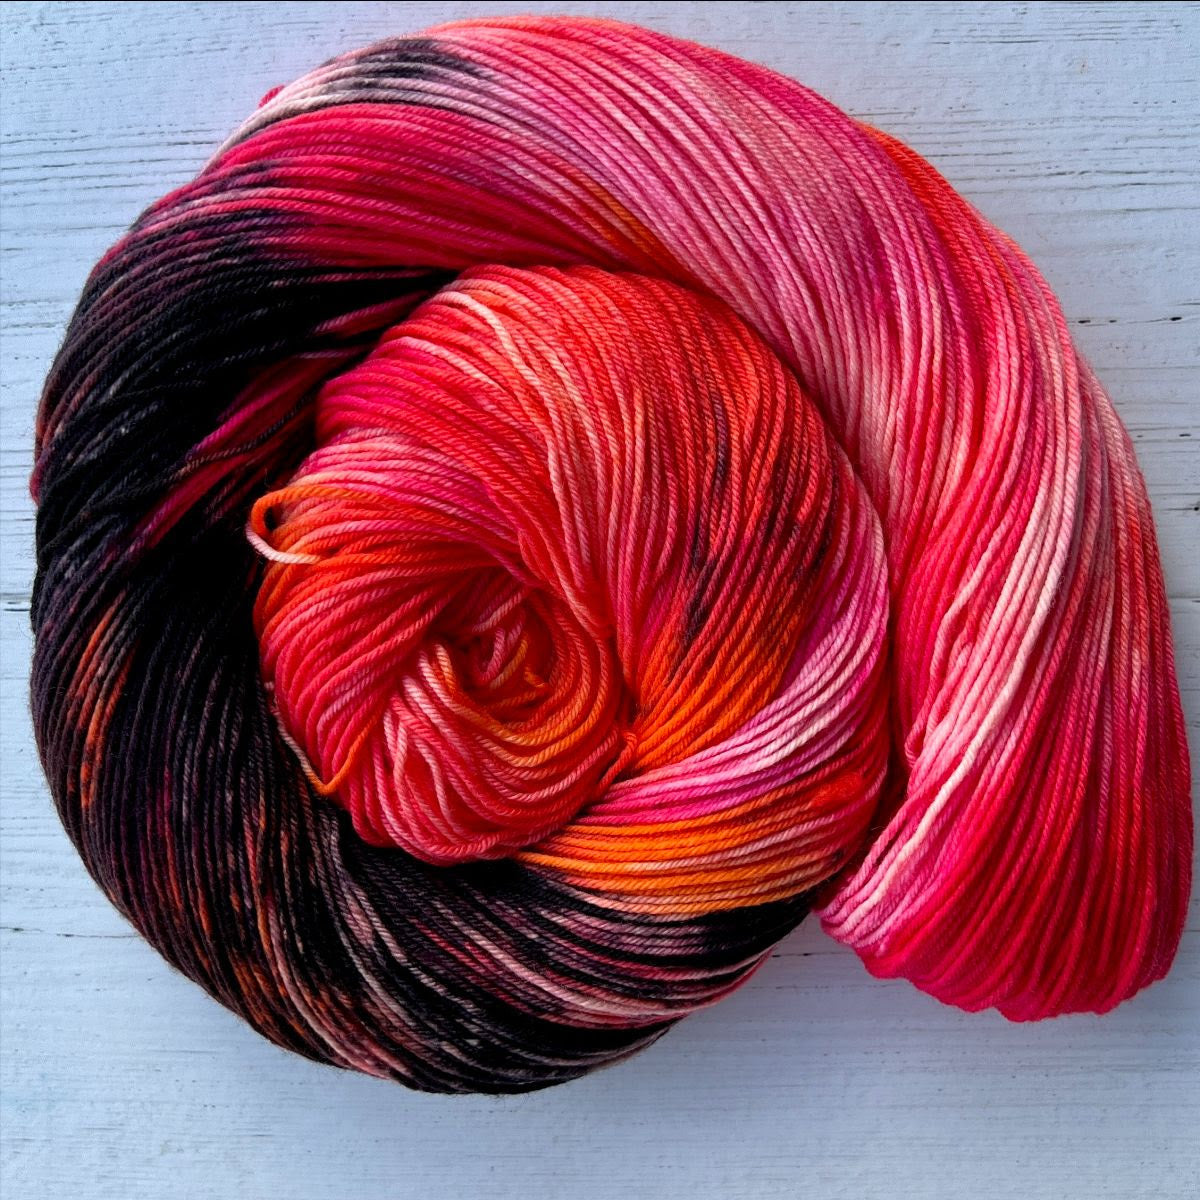 Feb 2023 Herstory: Lilith's Brood, a pink/black/orange skein twisted into a spiral